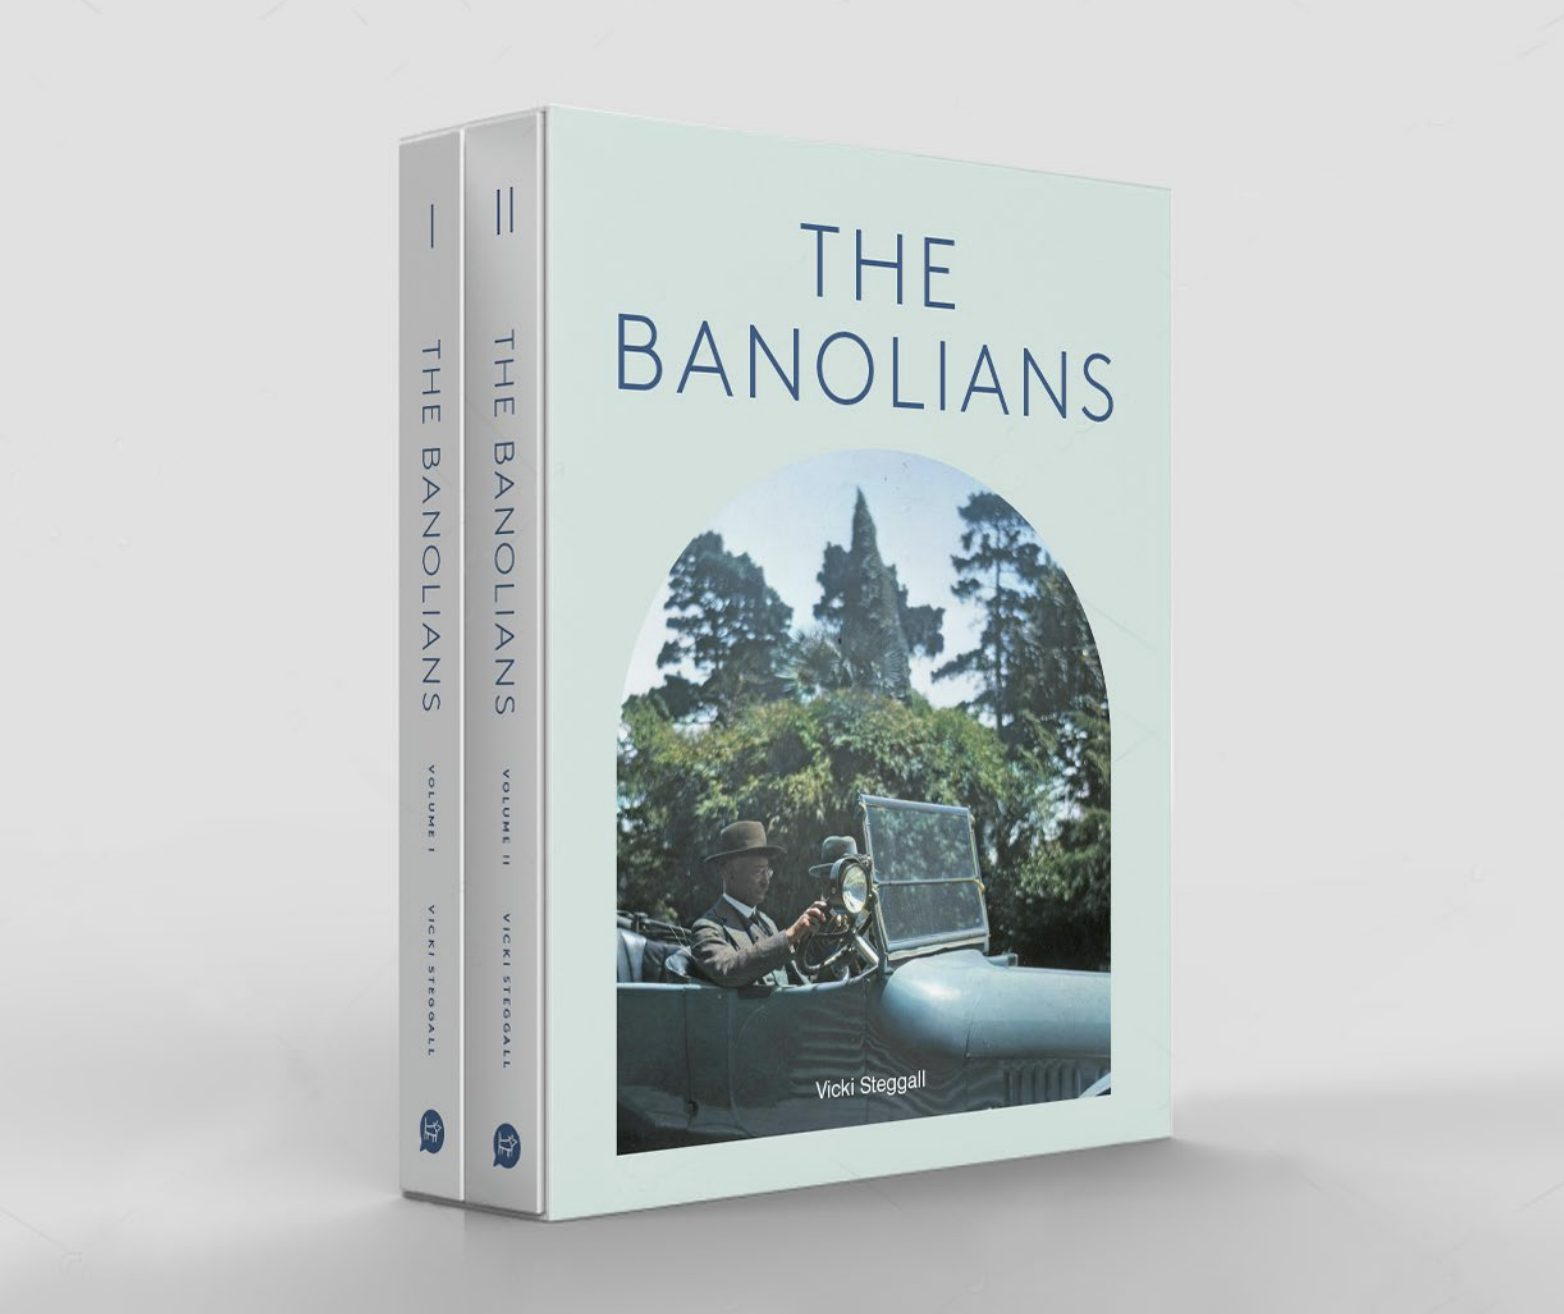 The Banolians Book written by Vicki Steggall